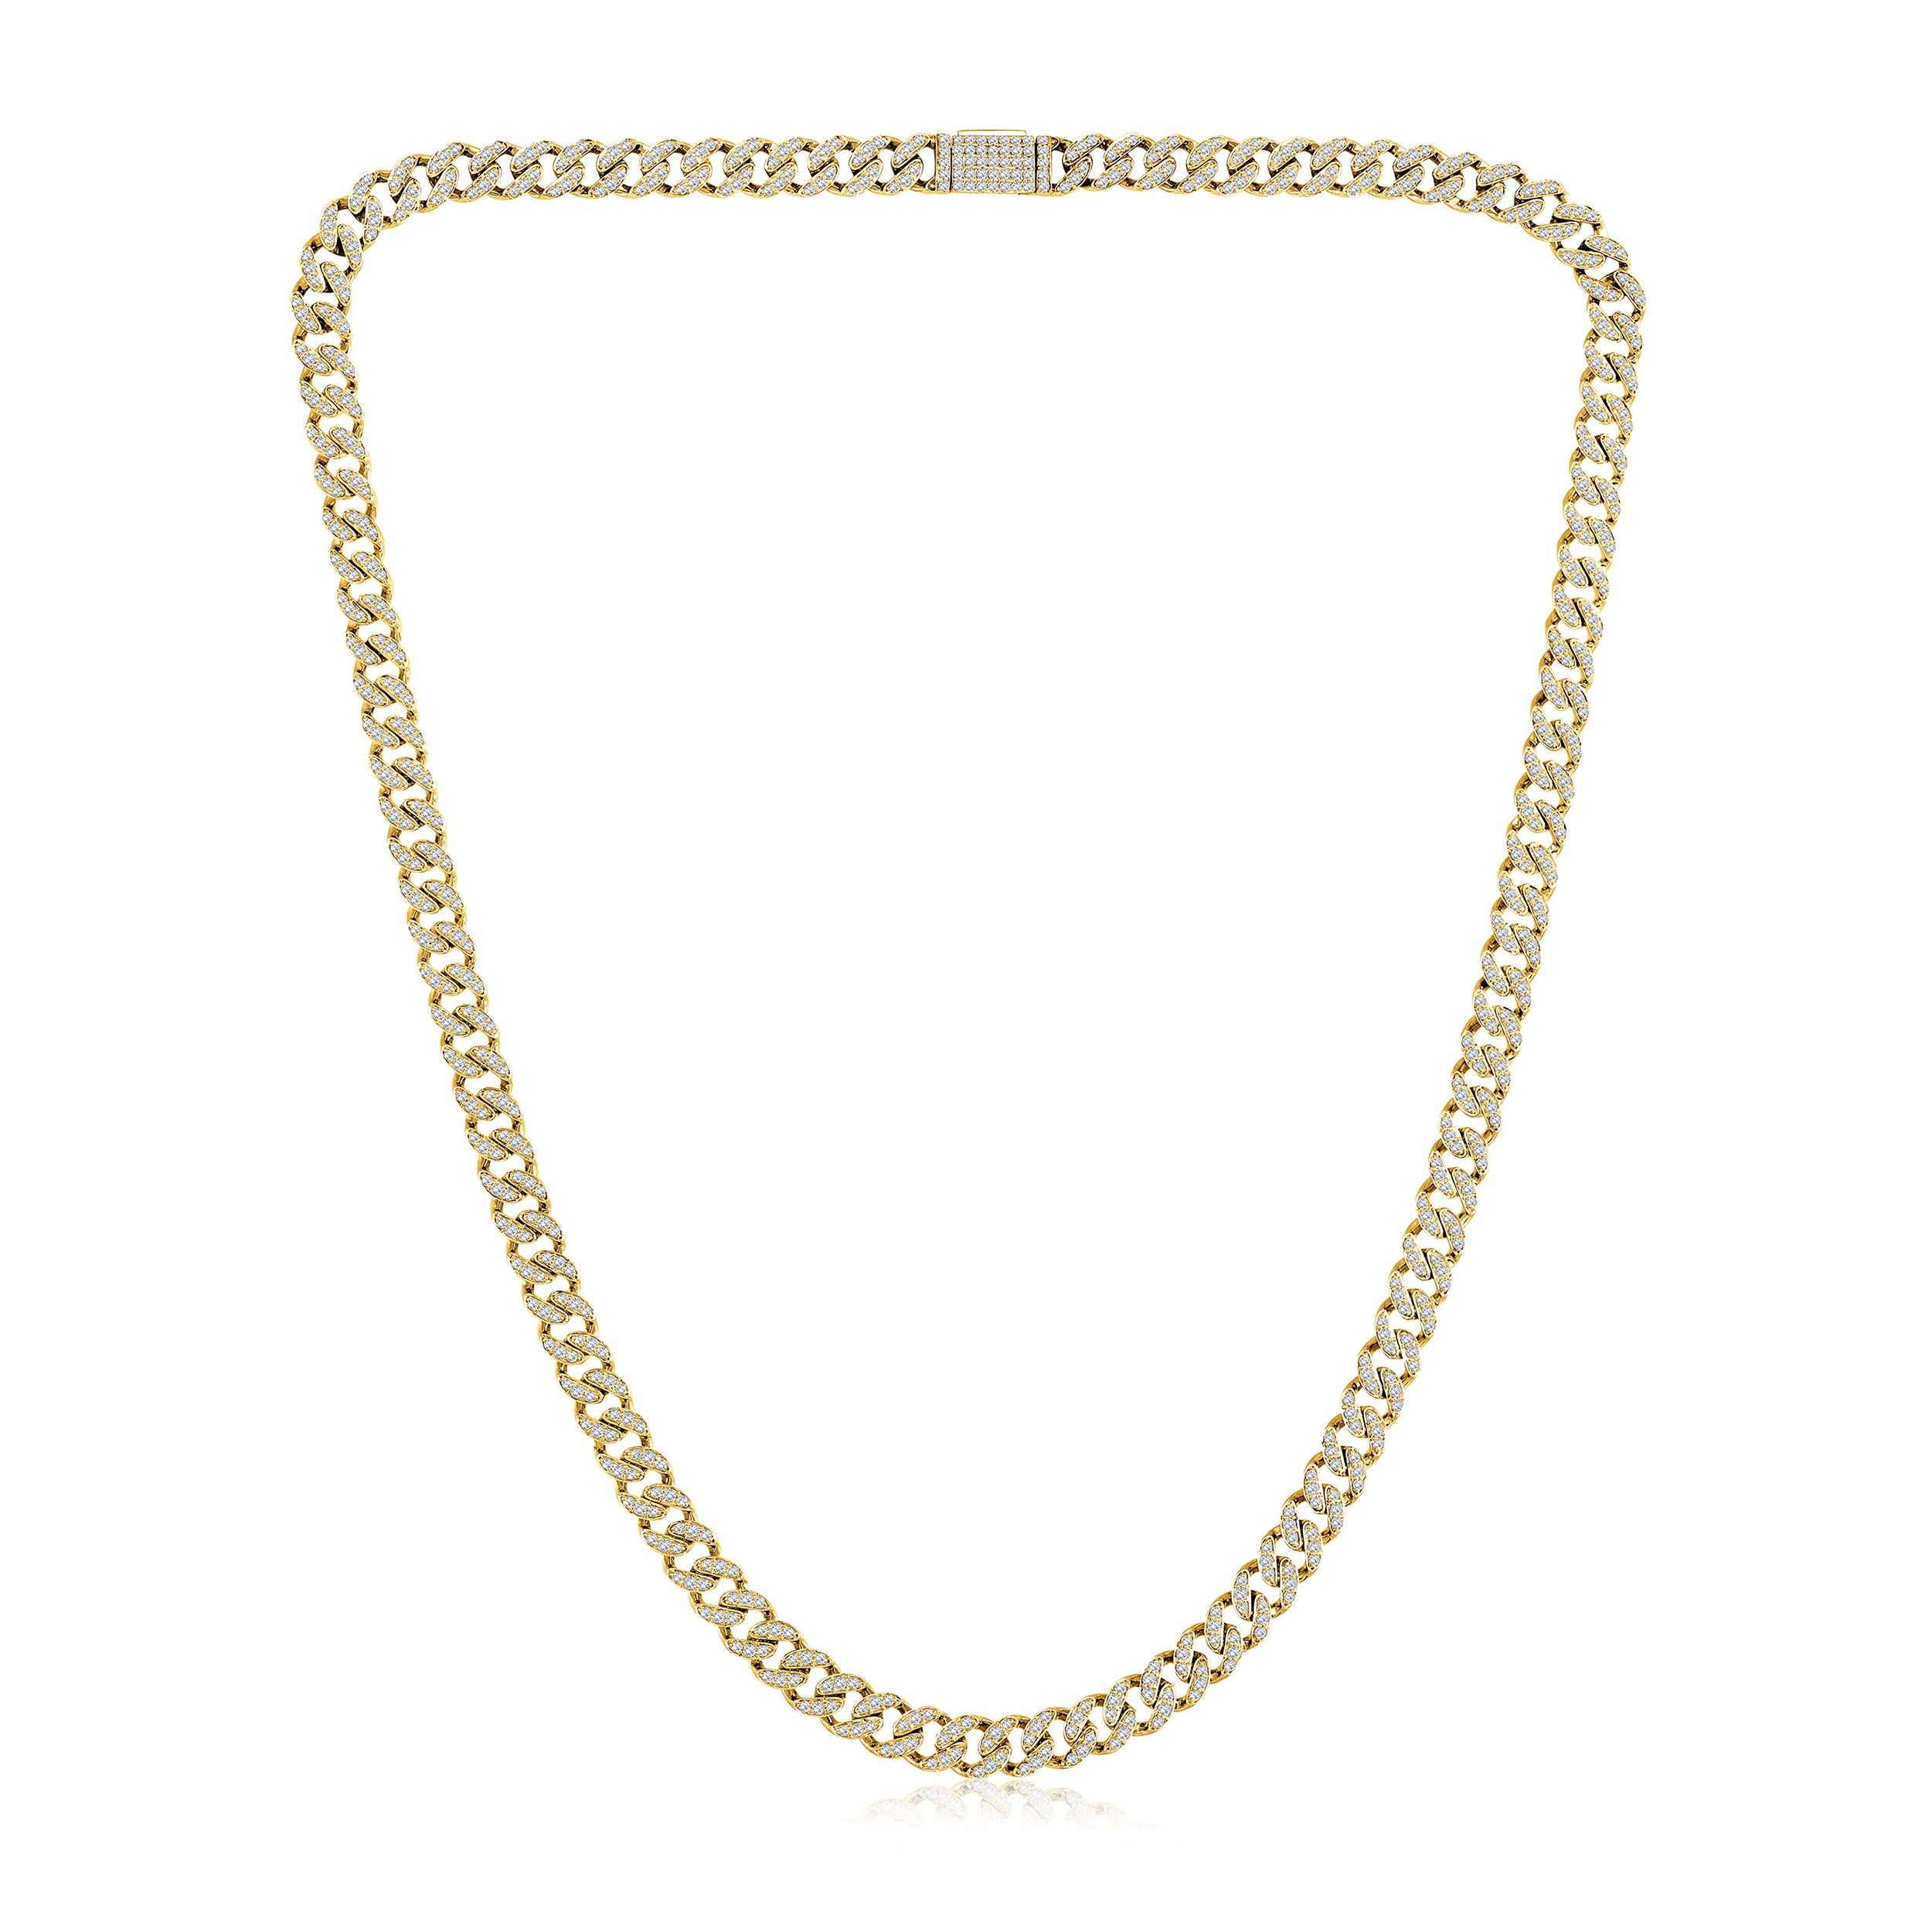 Crafted in 16.5 grams of 10K Yellow Gold, the necklace contains 732 stones of Round Diamonds with a total of 2.97 carat in F-G color and I1-I2 carat. The necklace length is 16 inches.

This jewelry piece will be expertly crafted by our skilled